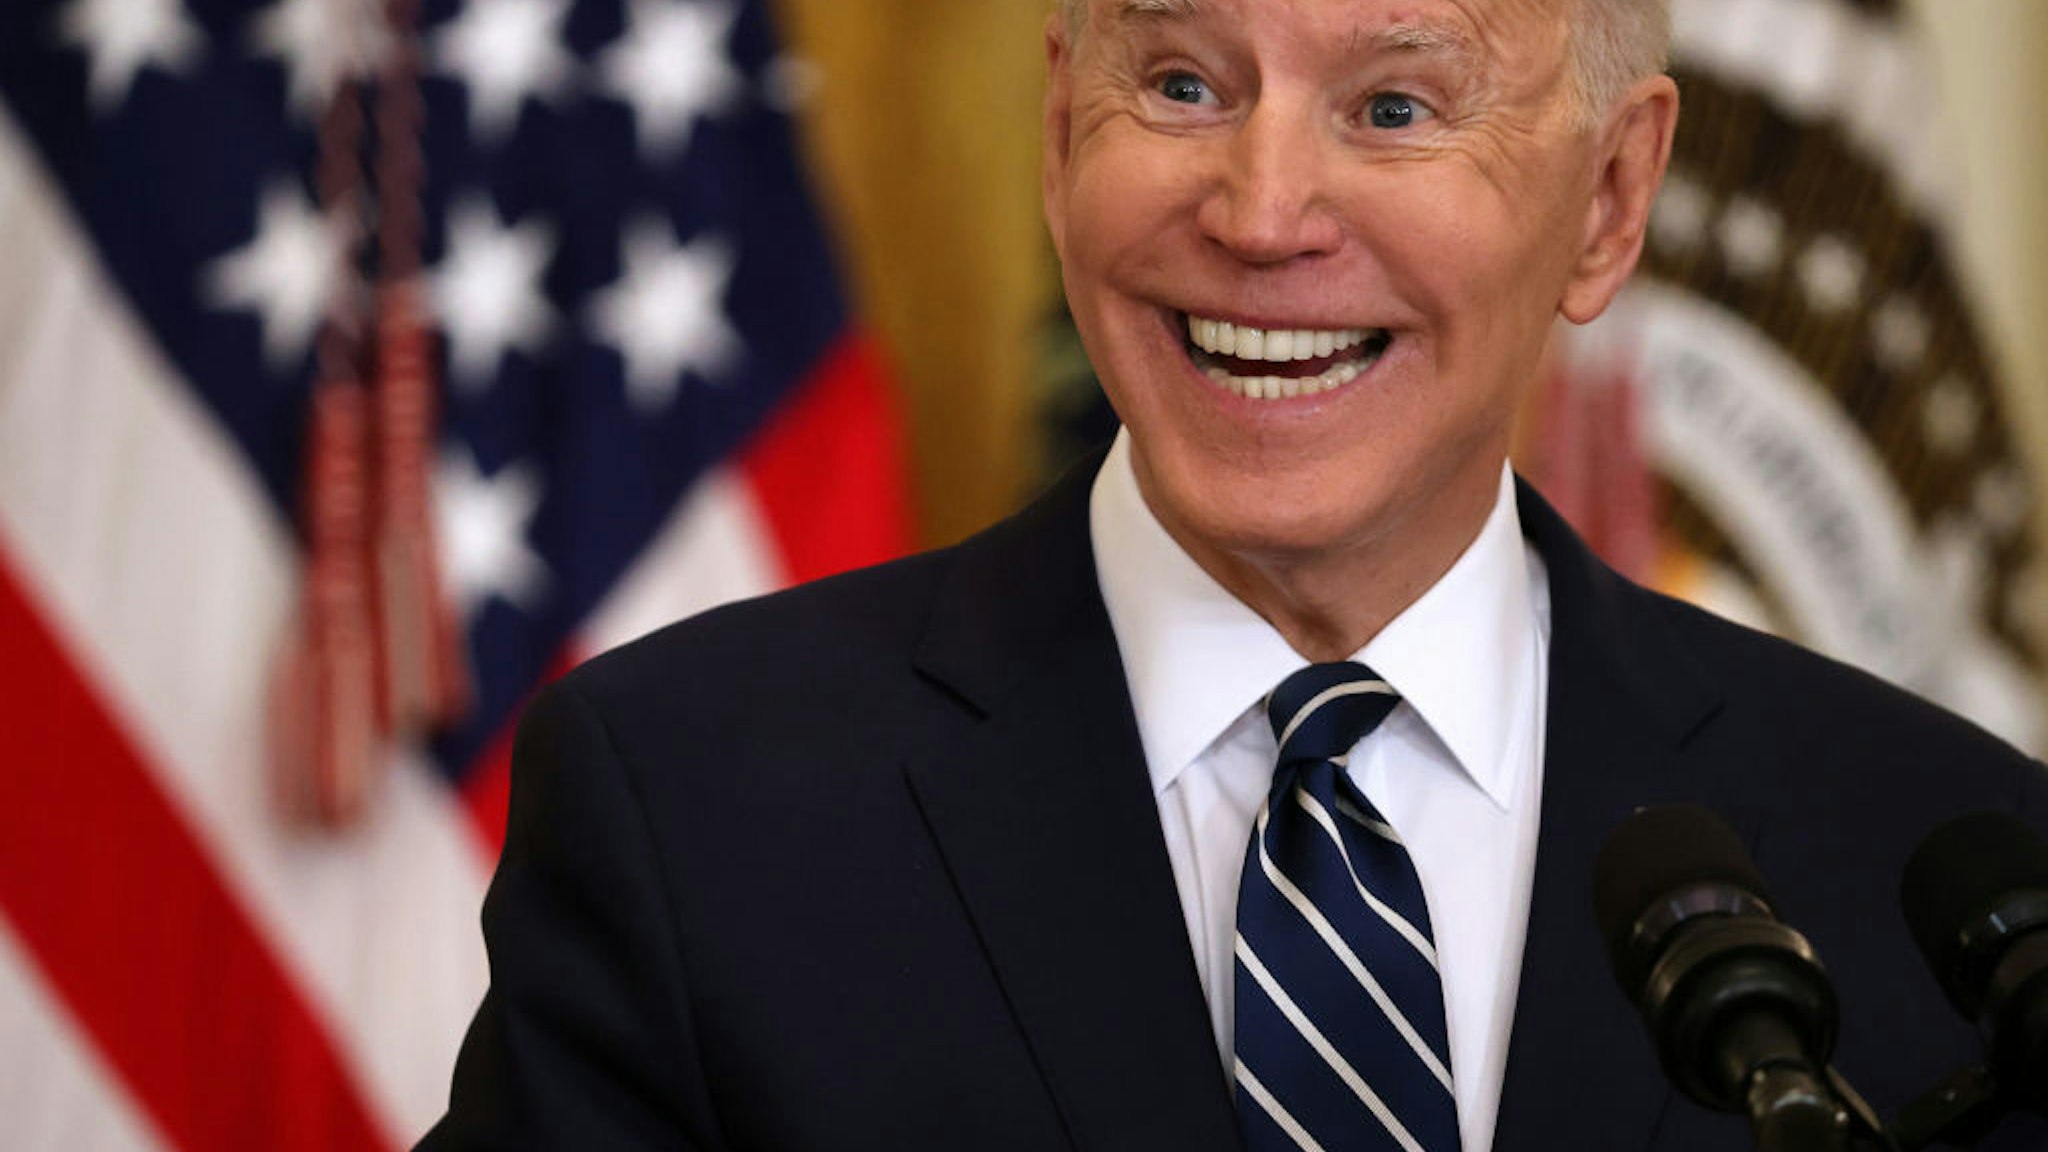 U.S. President Joe Biden talks to reporters during the first news conference of his presidency in the East Room of the White House on March 25, 2021 in Washington, DC.